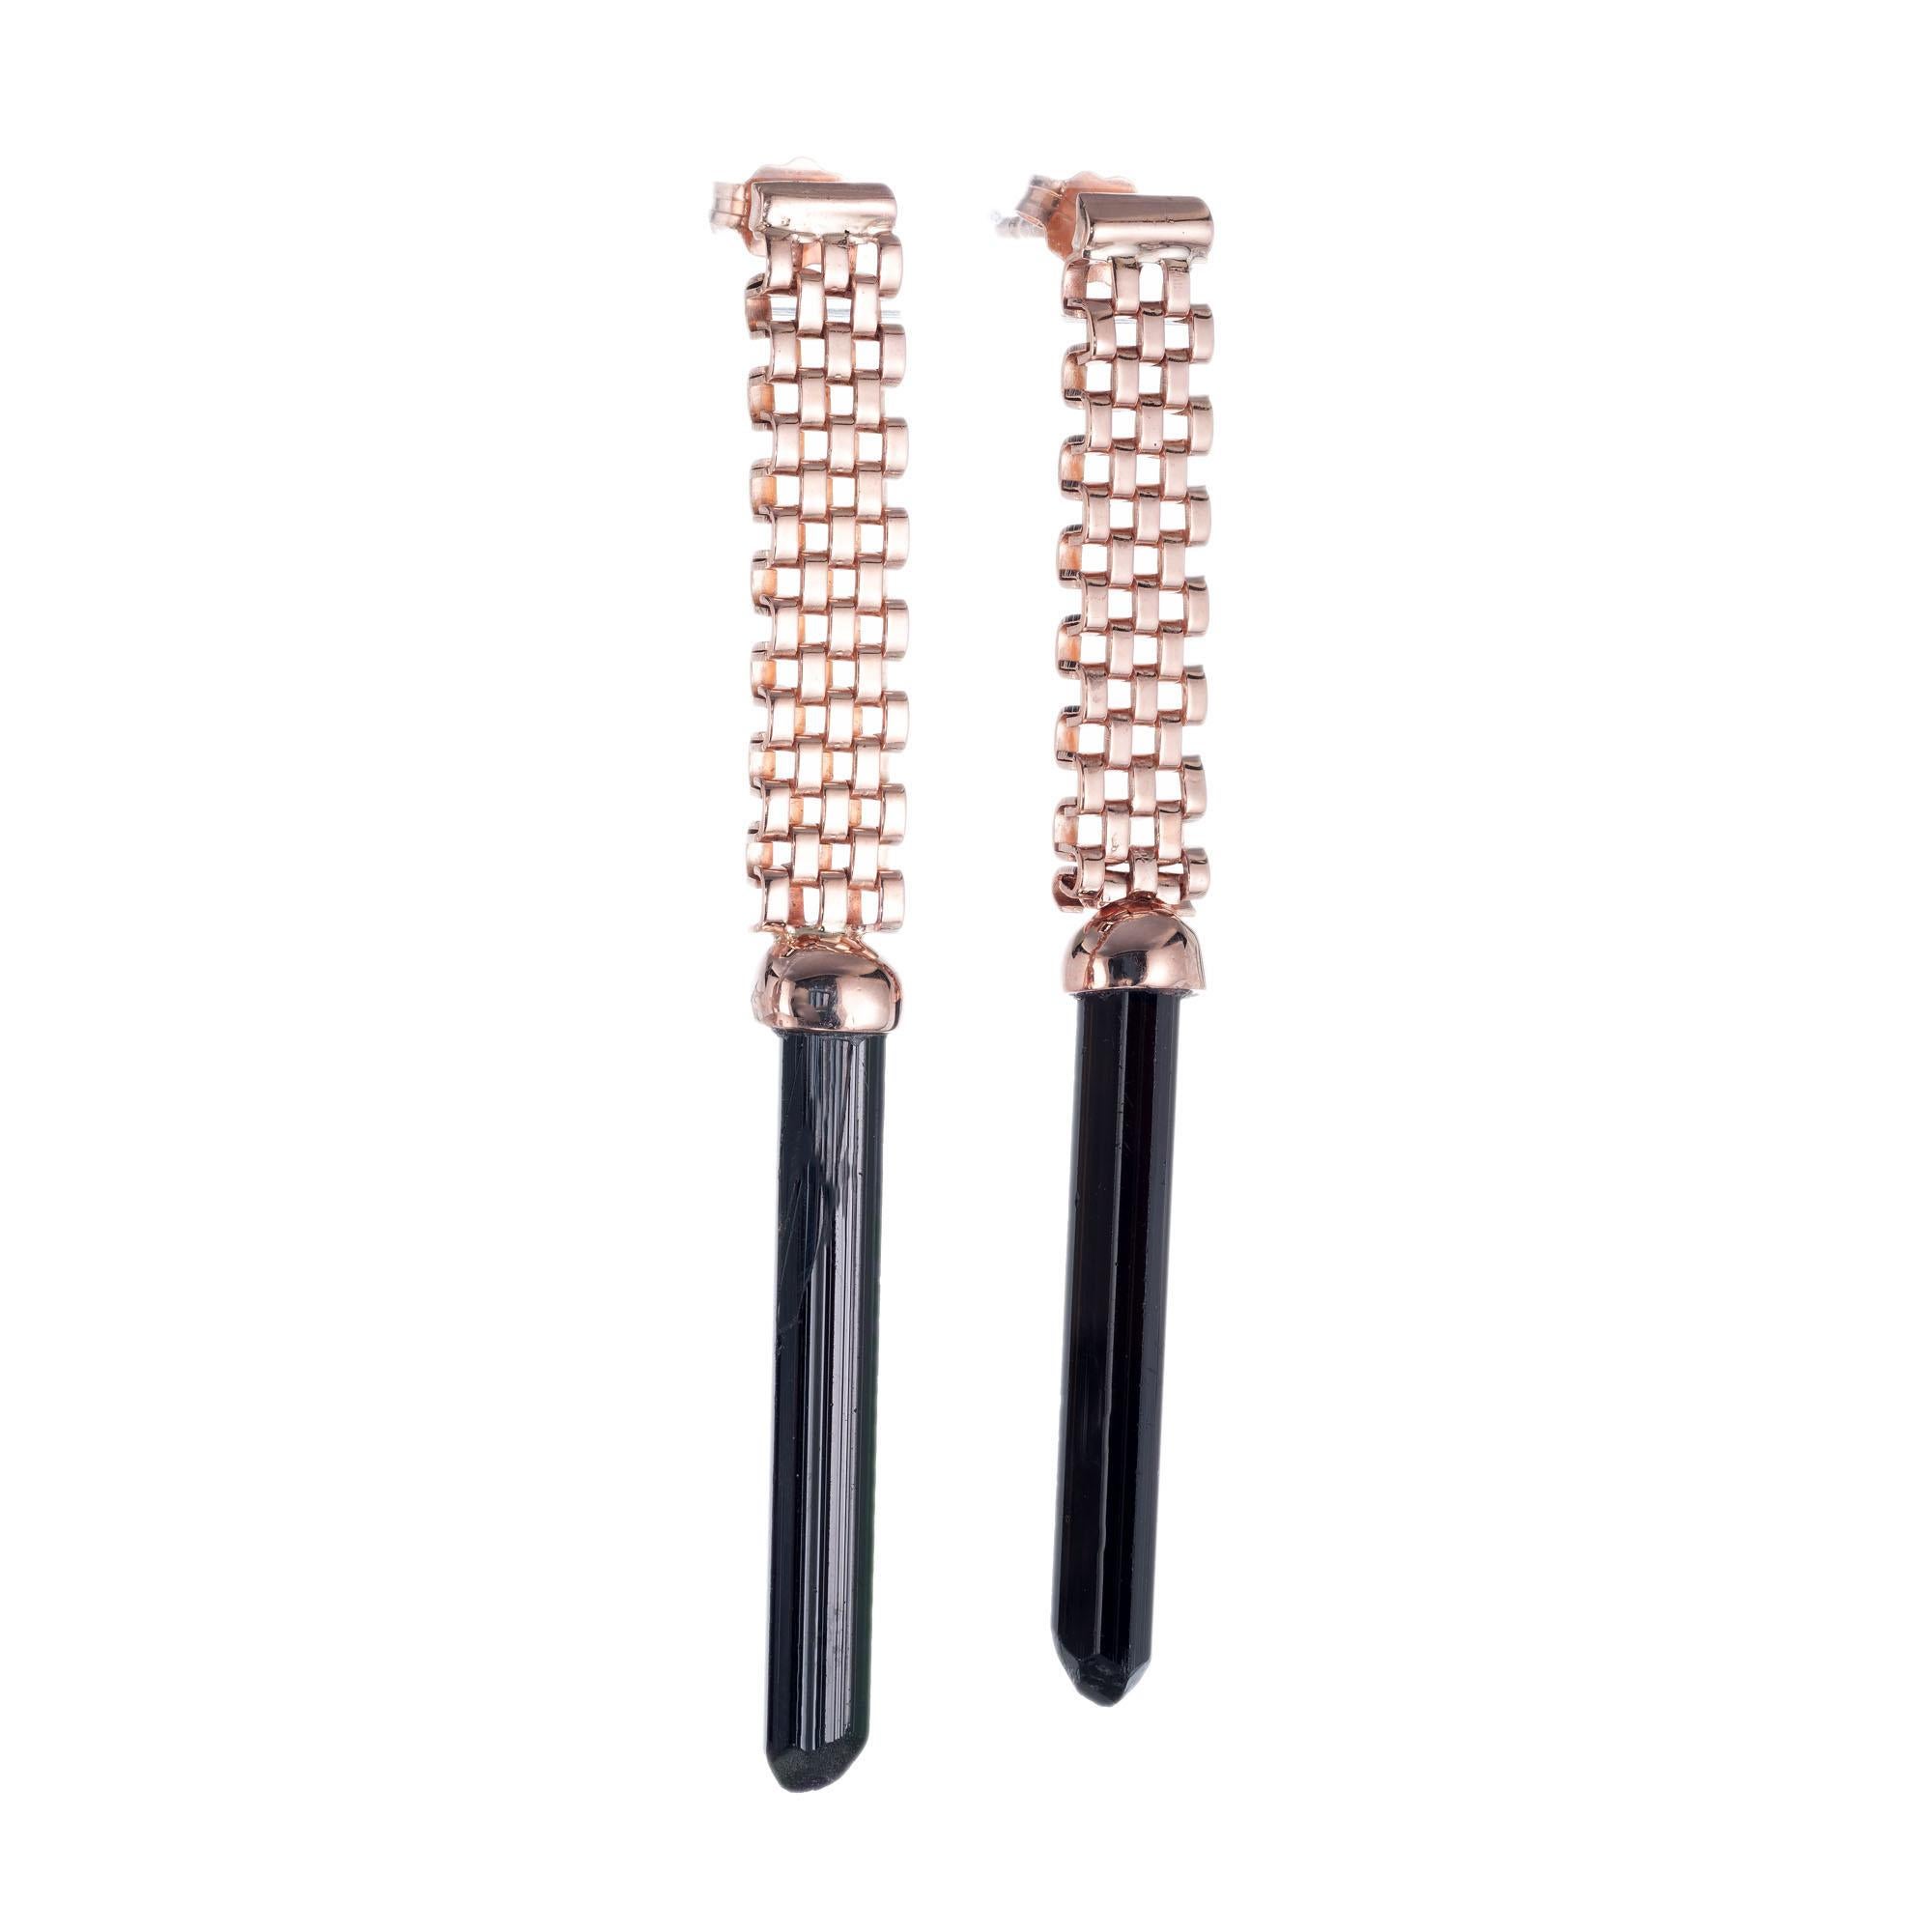 Natural untreated black tourmaline crystal dangle earrings with 14k rose gold mesh tops for pierced ears. Circa 1940

2 black tourmaline cylinders, SI-I approx. 8.66cts
14 rose gold 
Stamped: 585
6.1 grams
Top to bottom: 51.9mm or 2.25 Inch
Width: